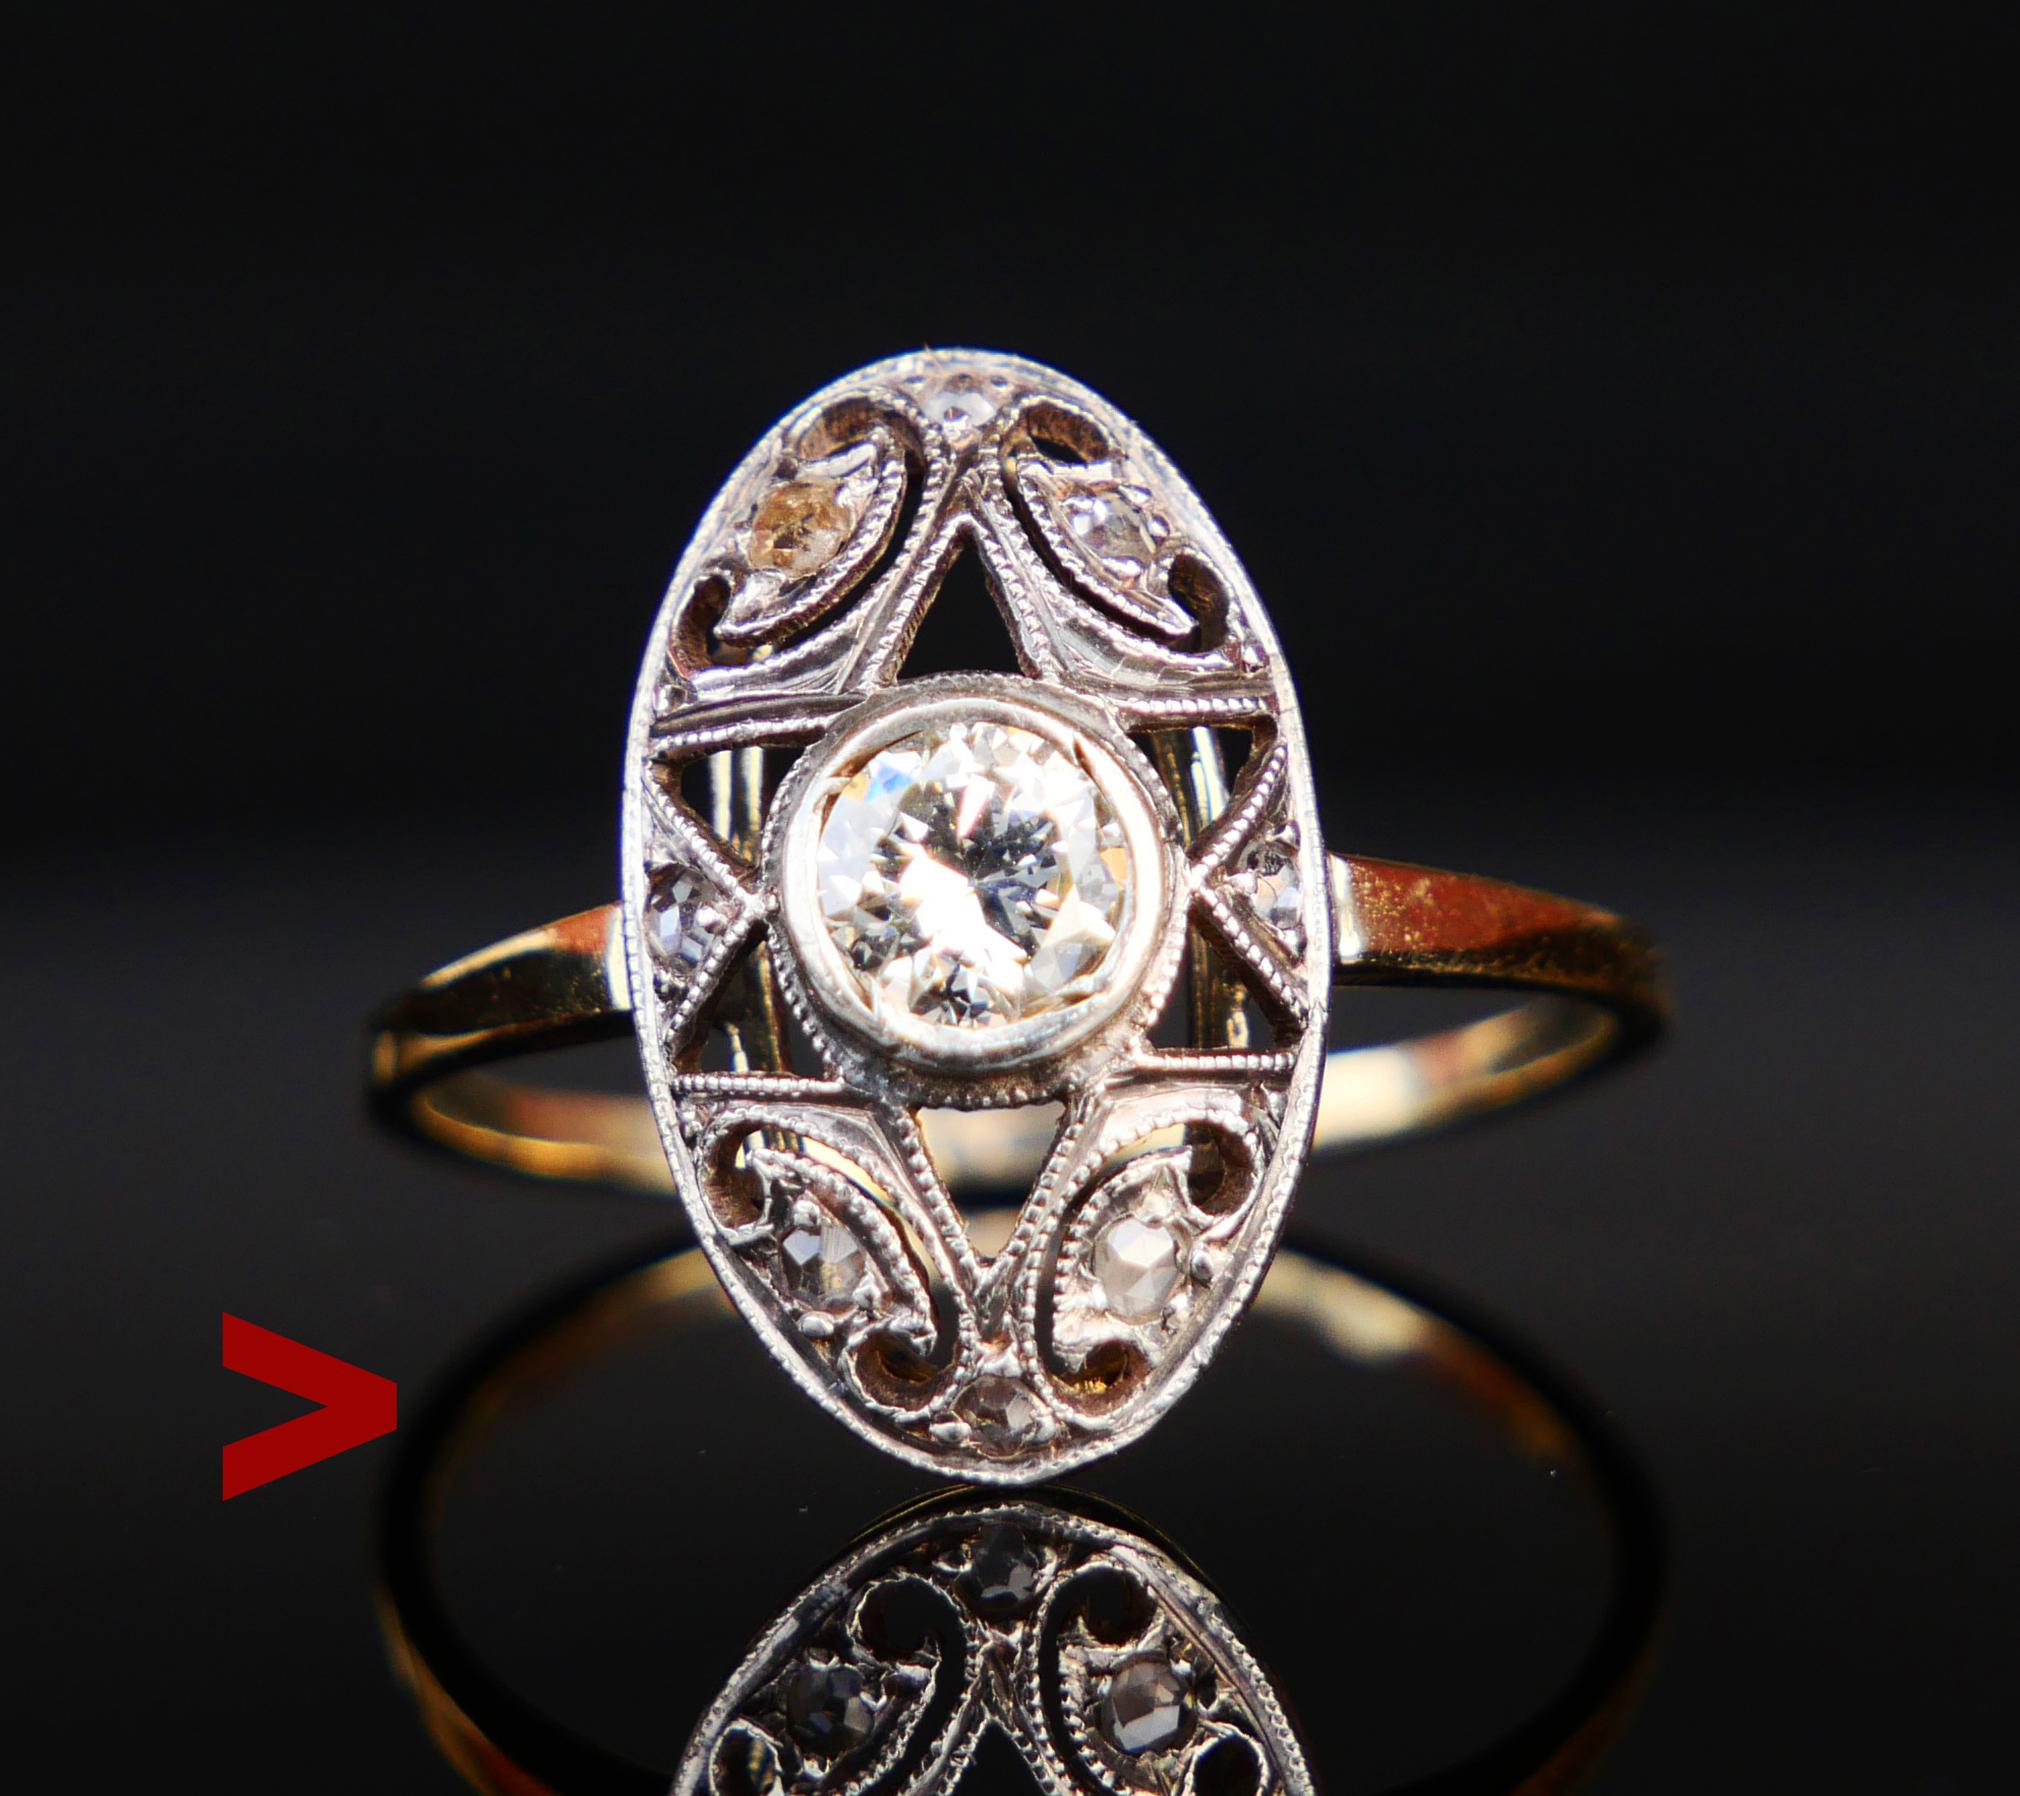 Ring from ca. 1920s -1930s with openwork dome shaped crown in 14K White Gold on 14K Green Gold. Accented Six pointed Star ornament decorated with nine Diamonds placed in precise geometrical order. Largest is bezel set old European cut Diamond Ø 5mm